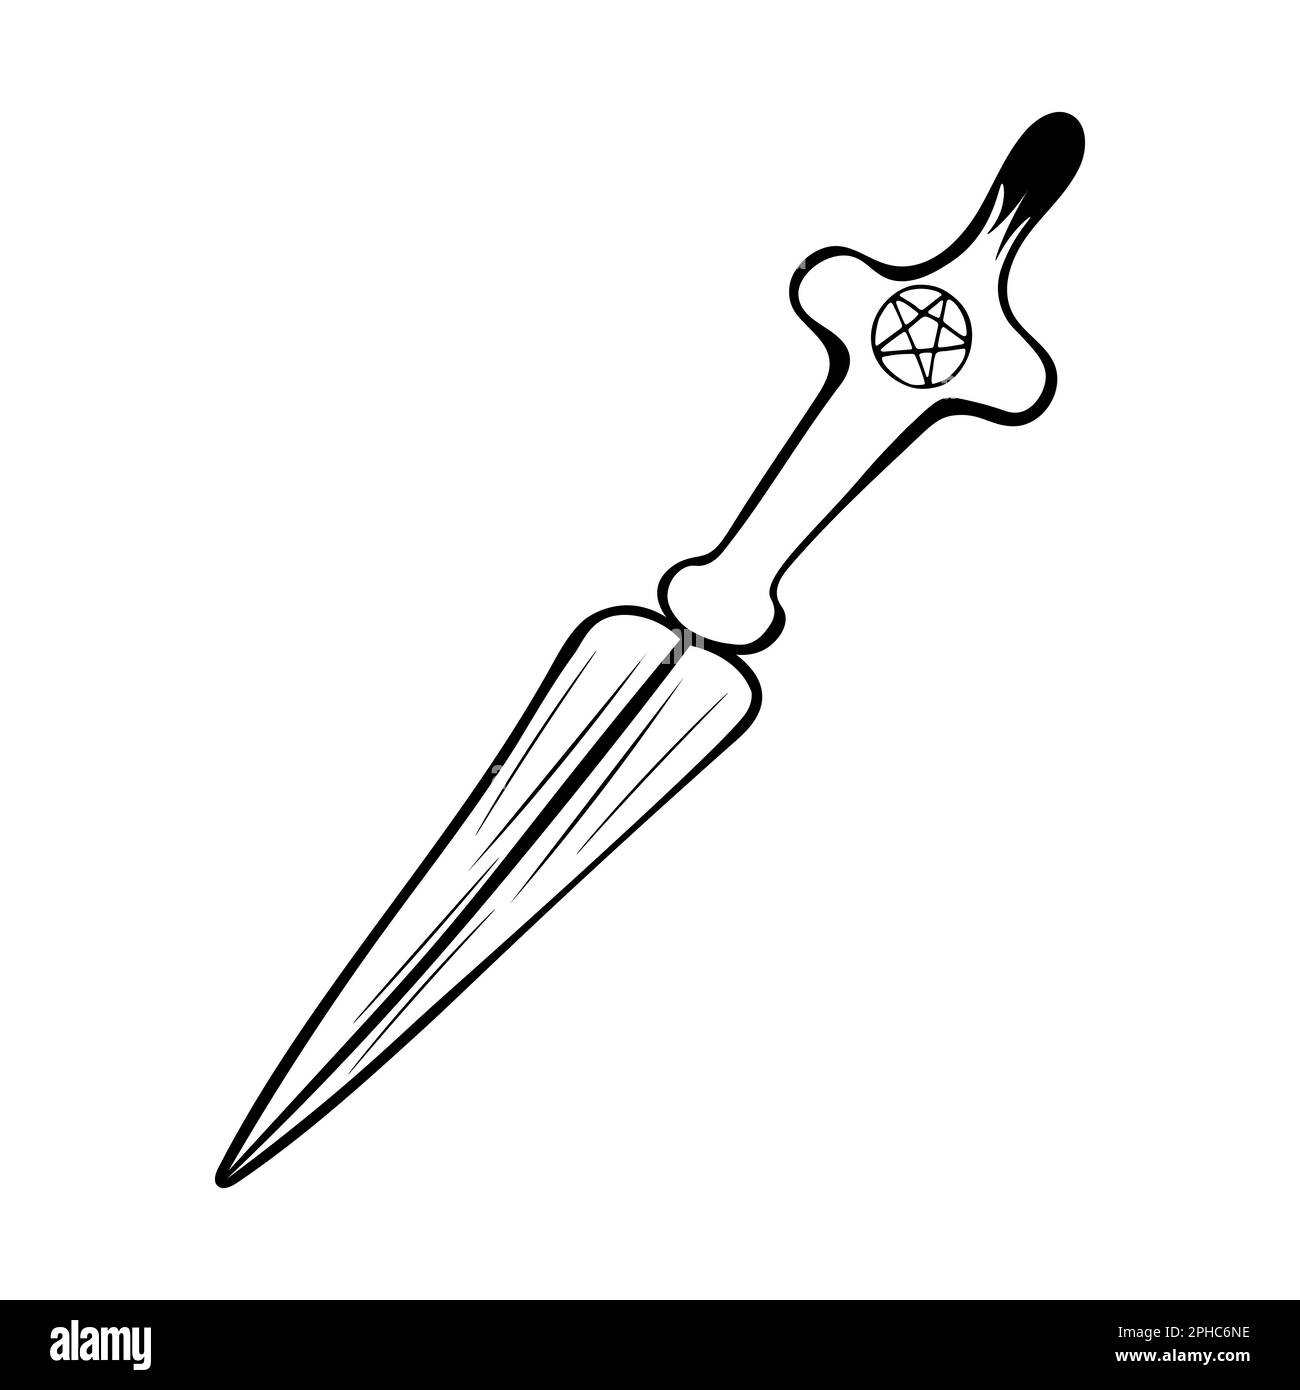 Hand-drawn knife with pentacle on the handle, vector illustration Stock Vector